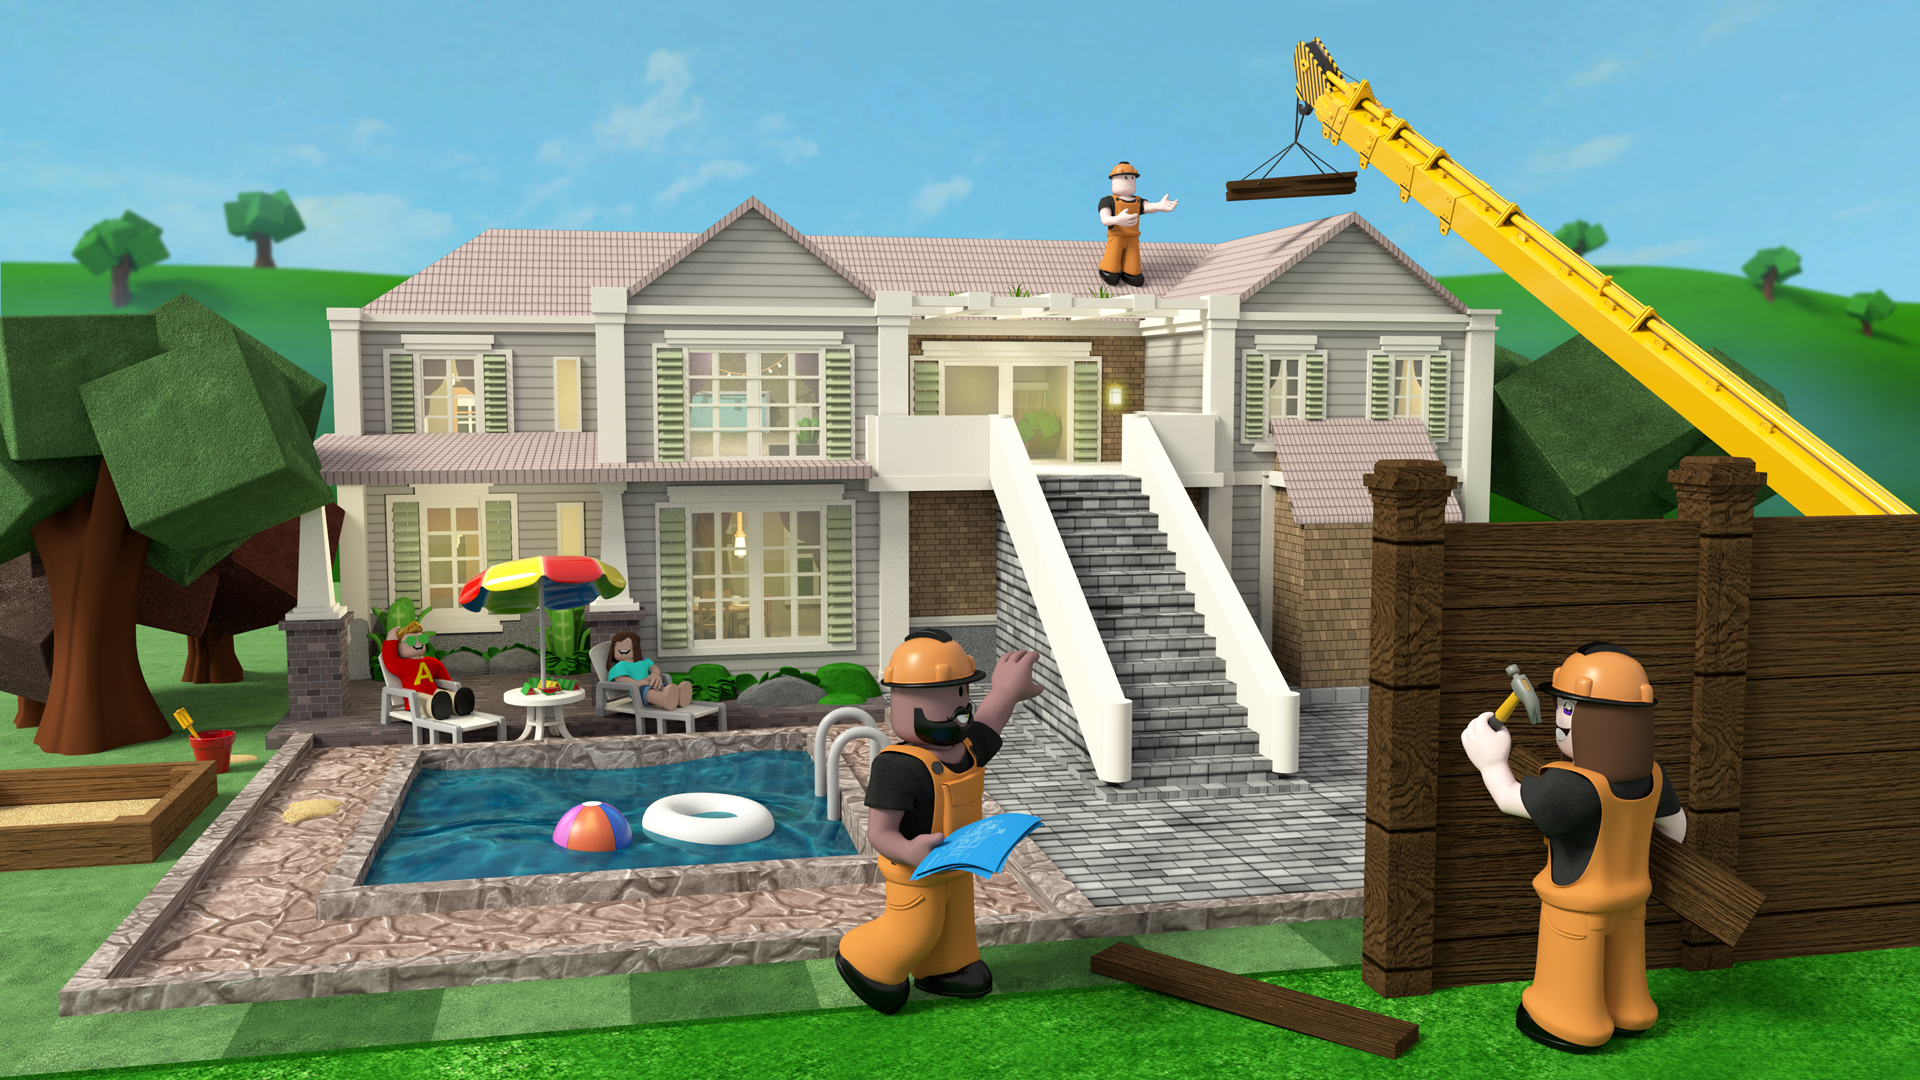 An Inside Look At Roblox The Gaming Universe That S Exploded To 164 000 000 Users By Spero Ventures Spero Ventures Sep 2020 Medium - my f 150 roblox